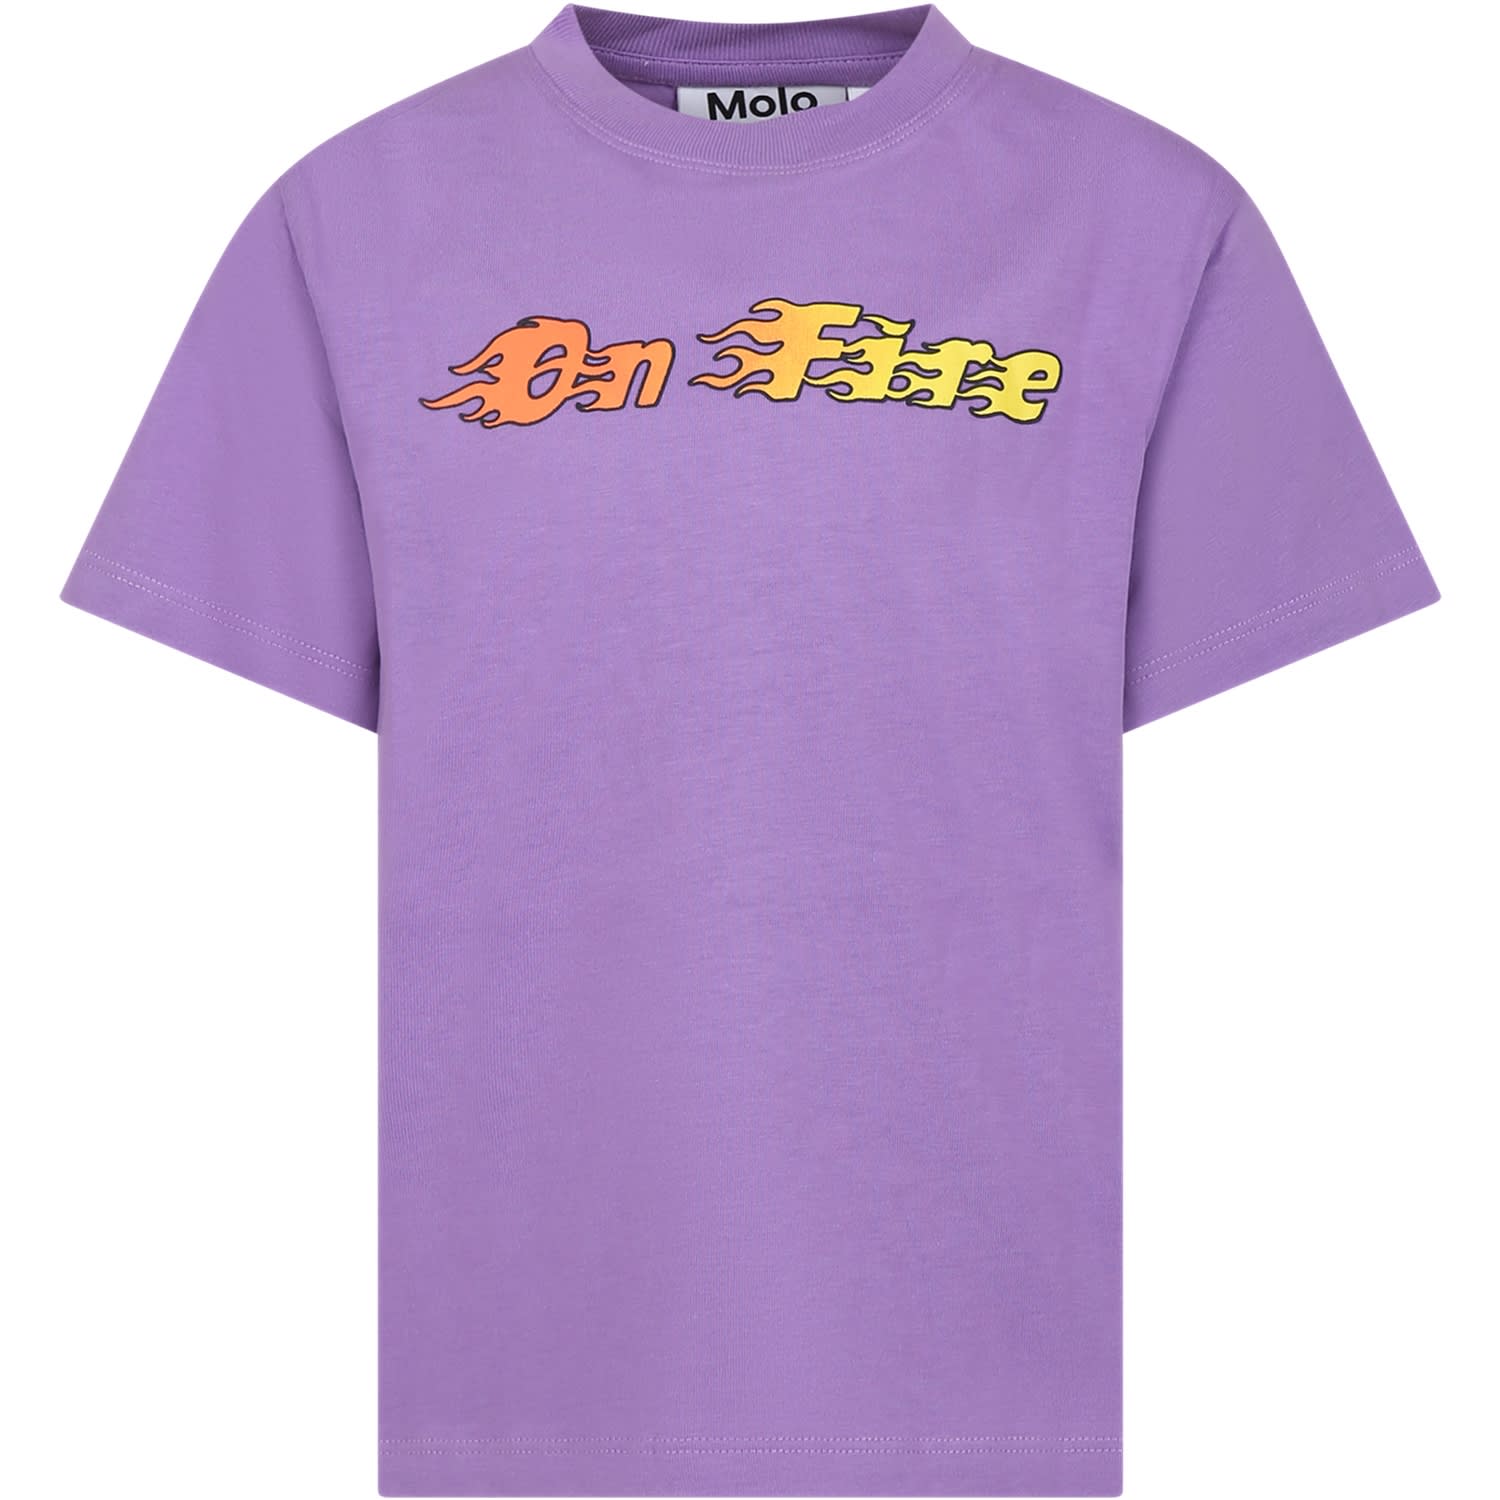 Molo Kids' Purple T-shirt For Boy With Writing In Violet